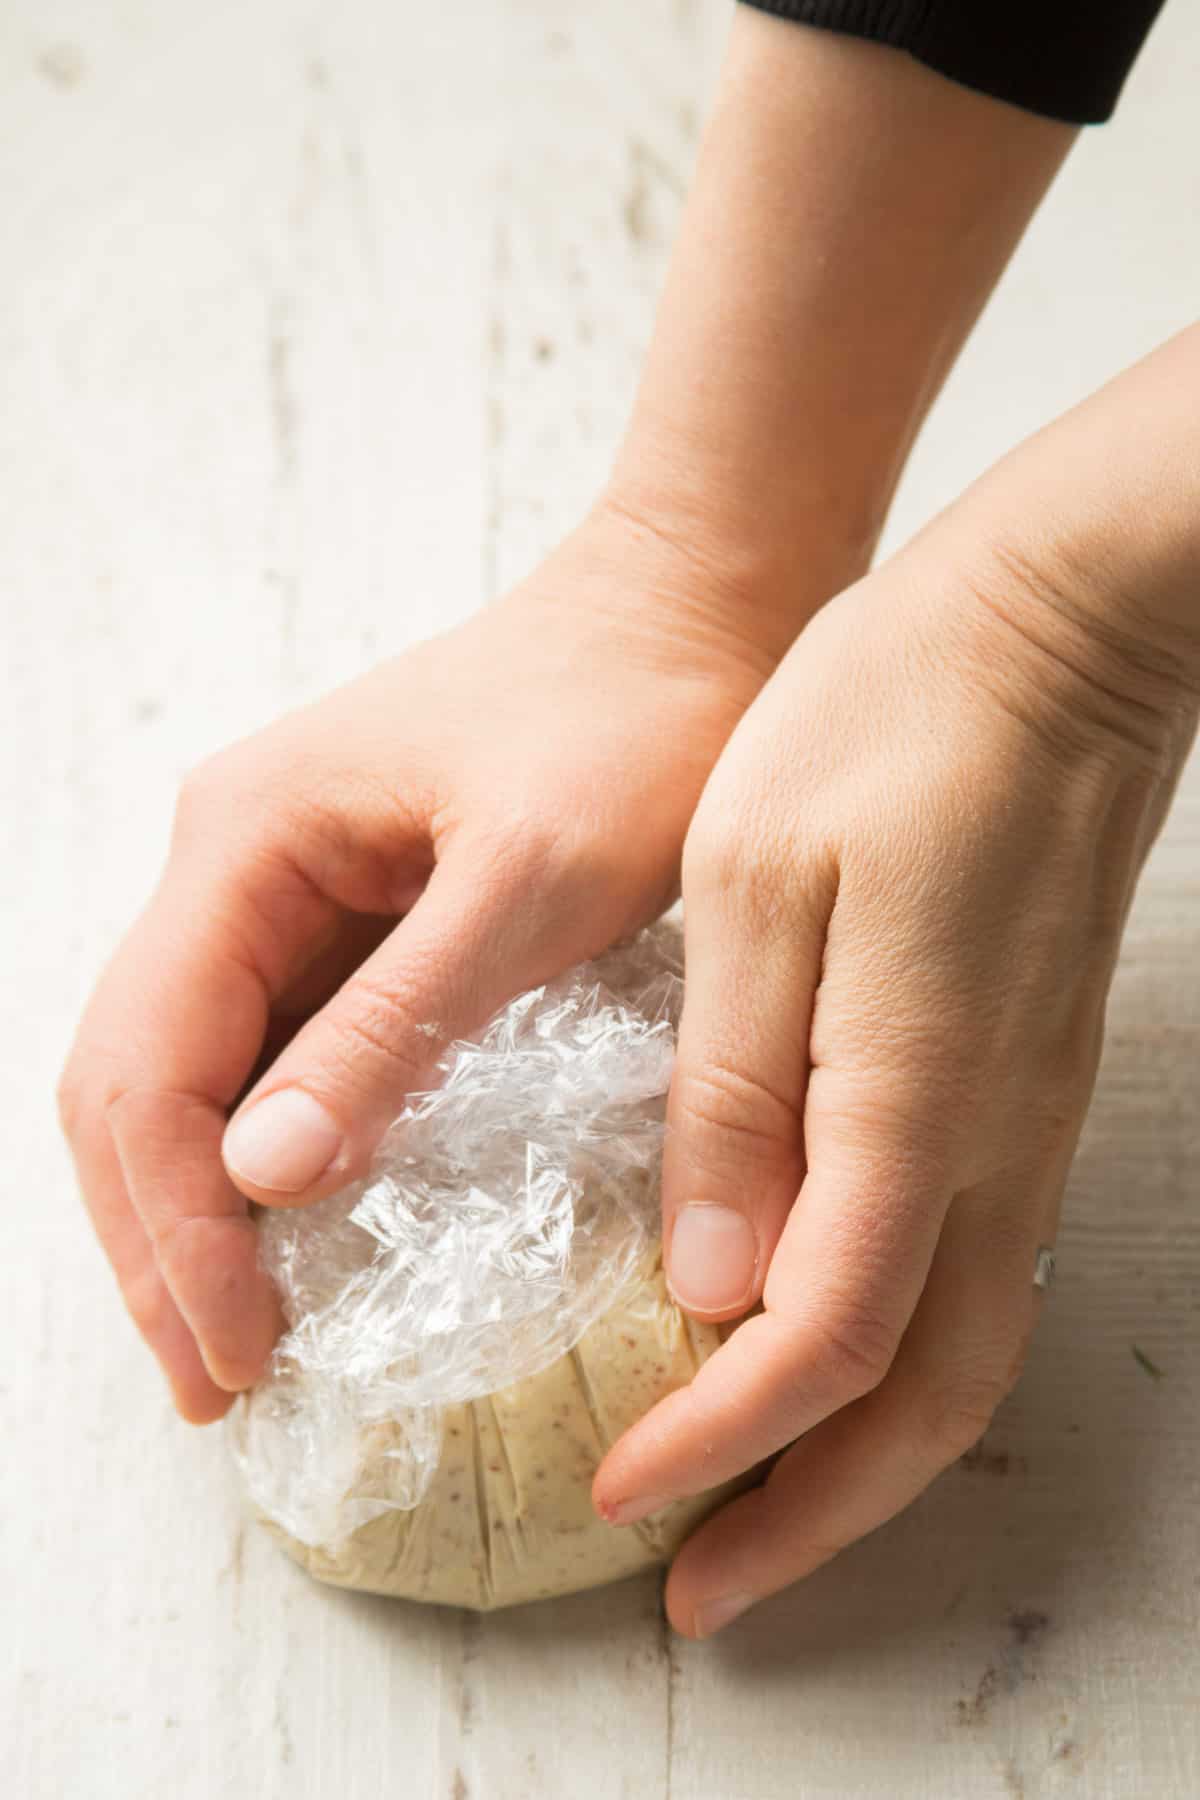 Hands Shaping a Plastic Wrapped Vegan Cheese Ball.